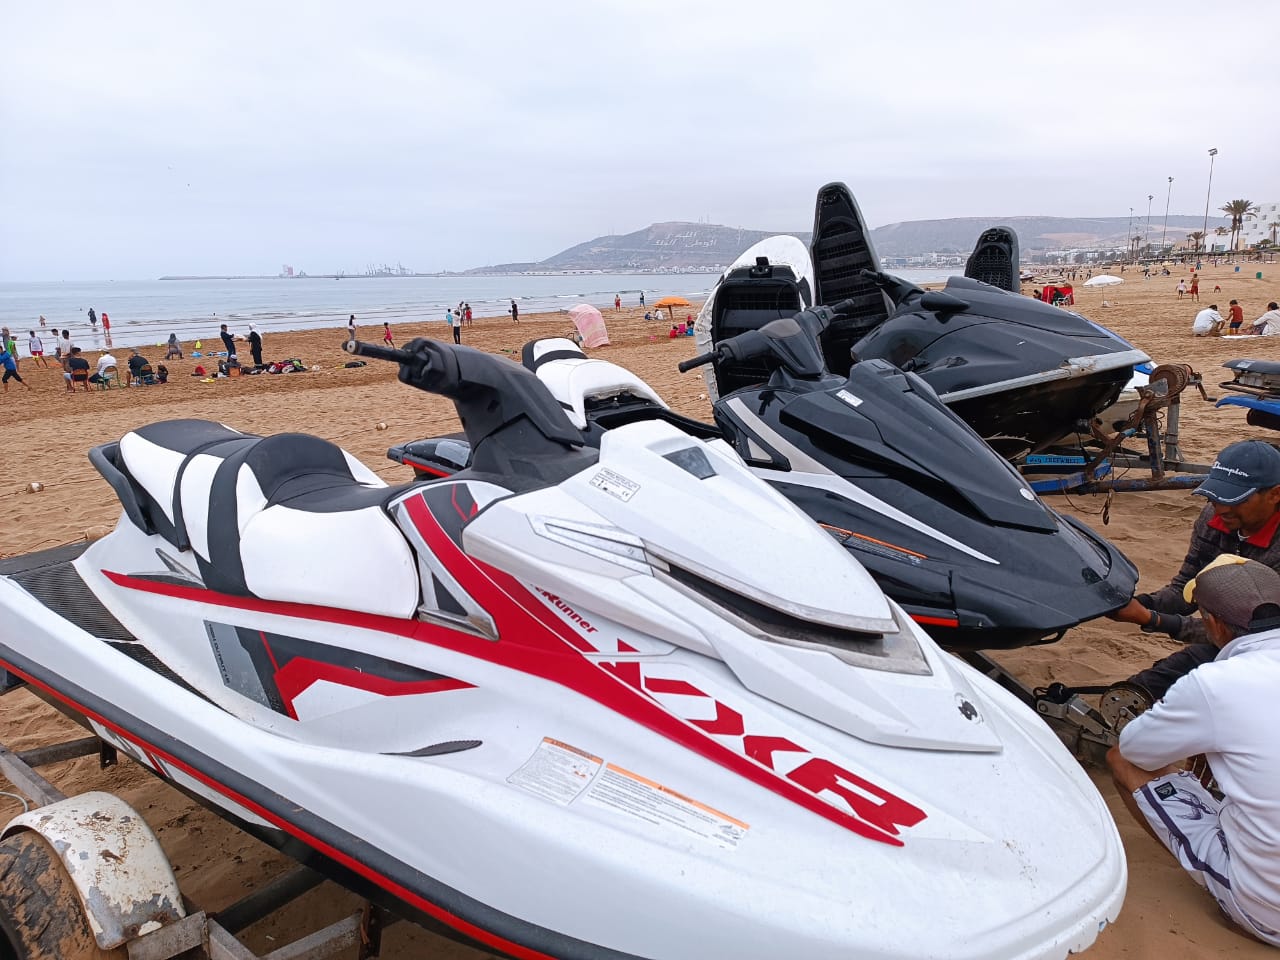 Agadir Jet Ski: The Ultimate Way to Have Fun and Refreshing Experience